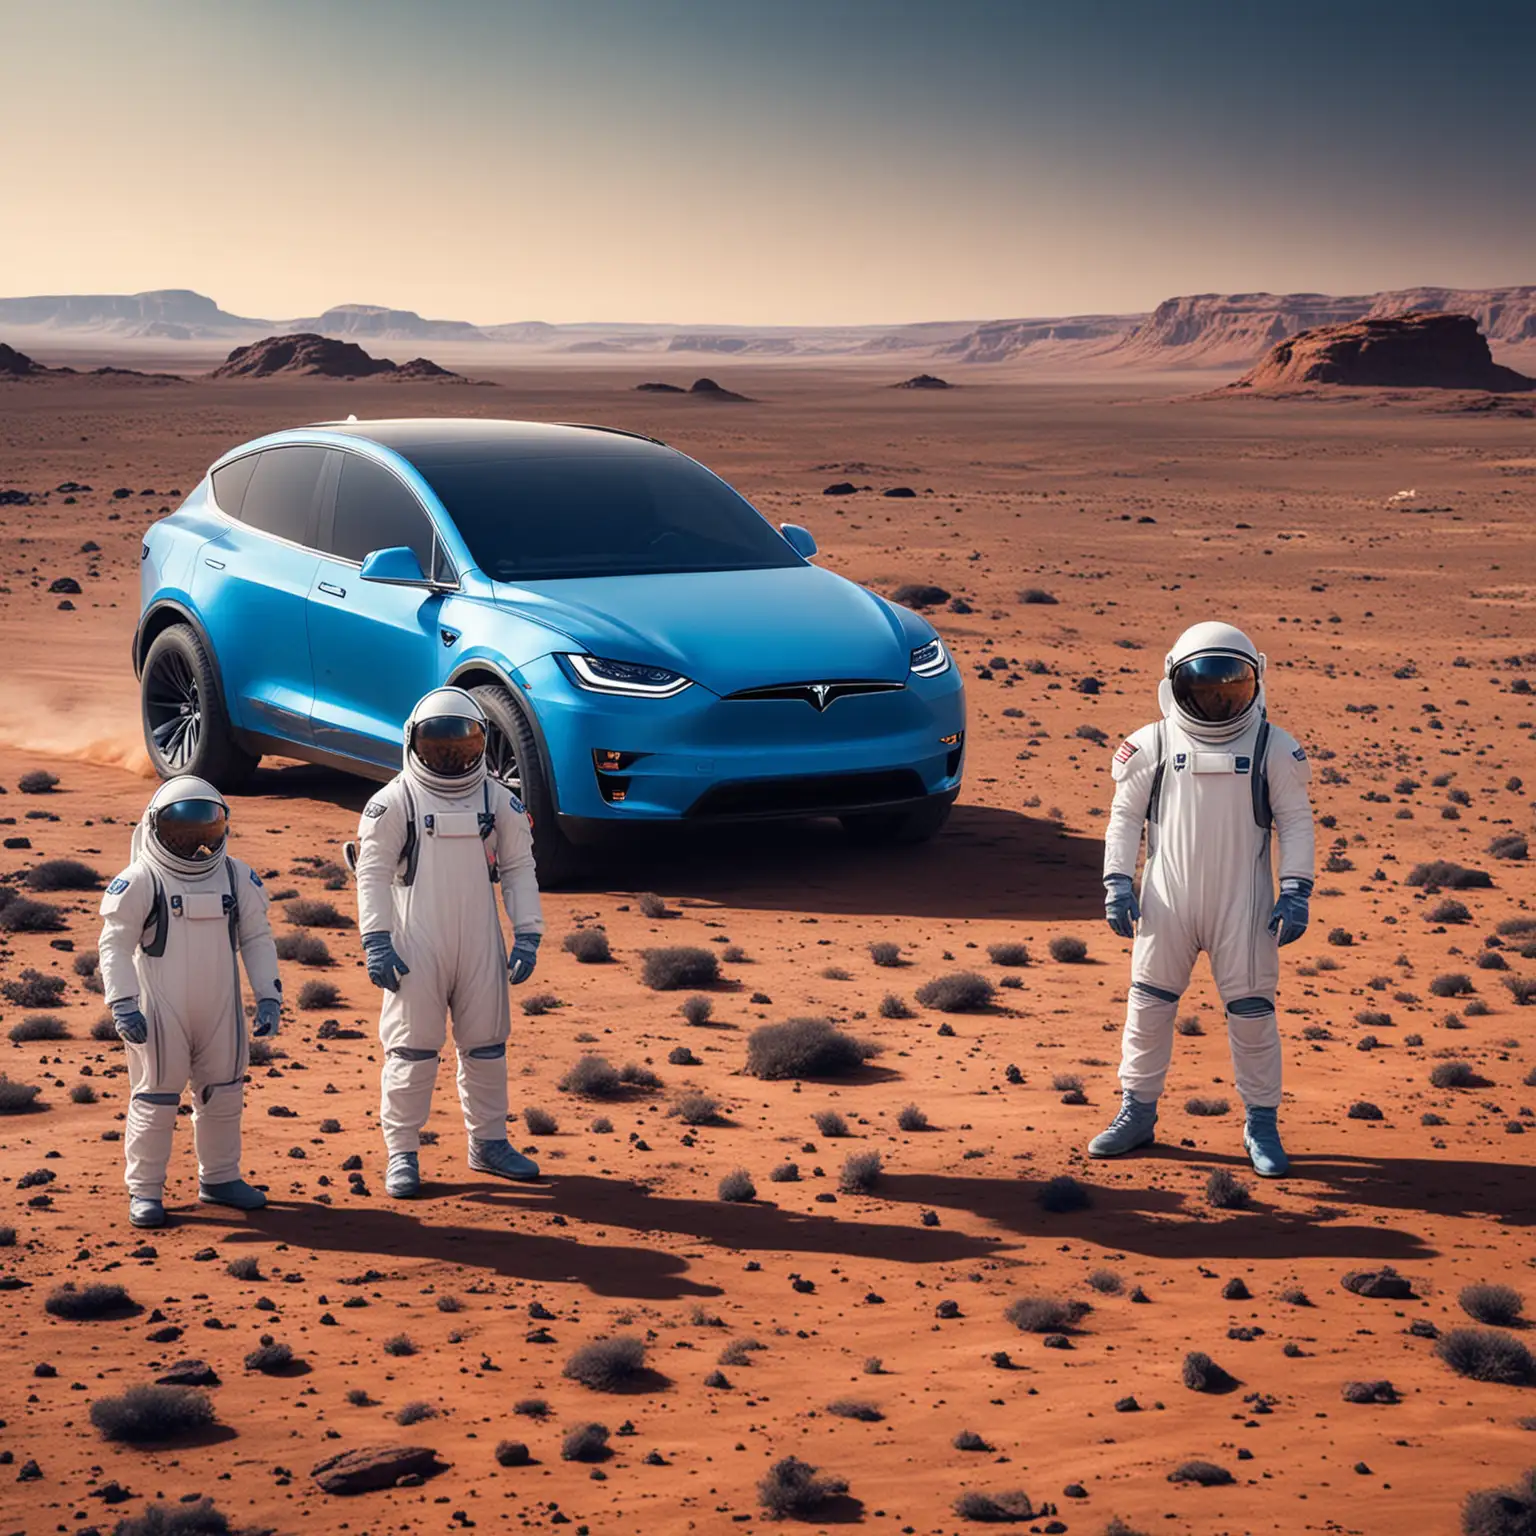 on the planet mars a blue tesla Y model and two white robes astronauts